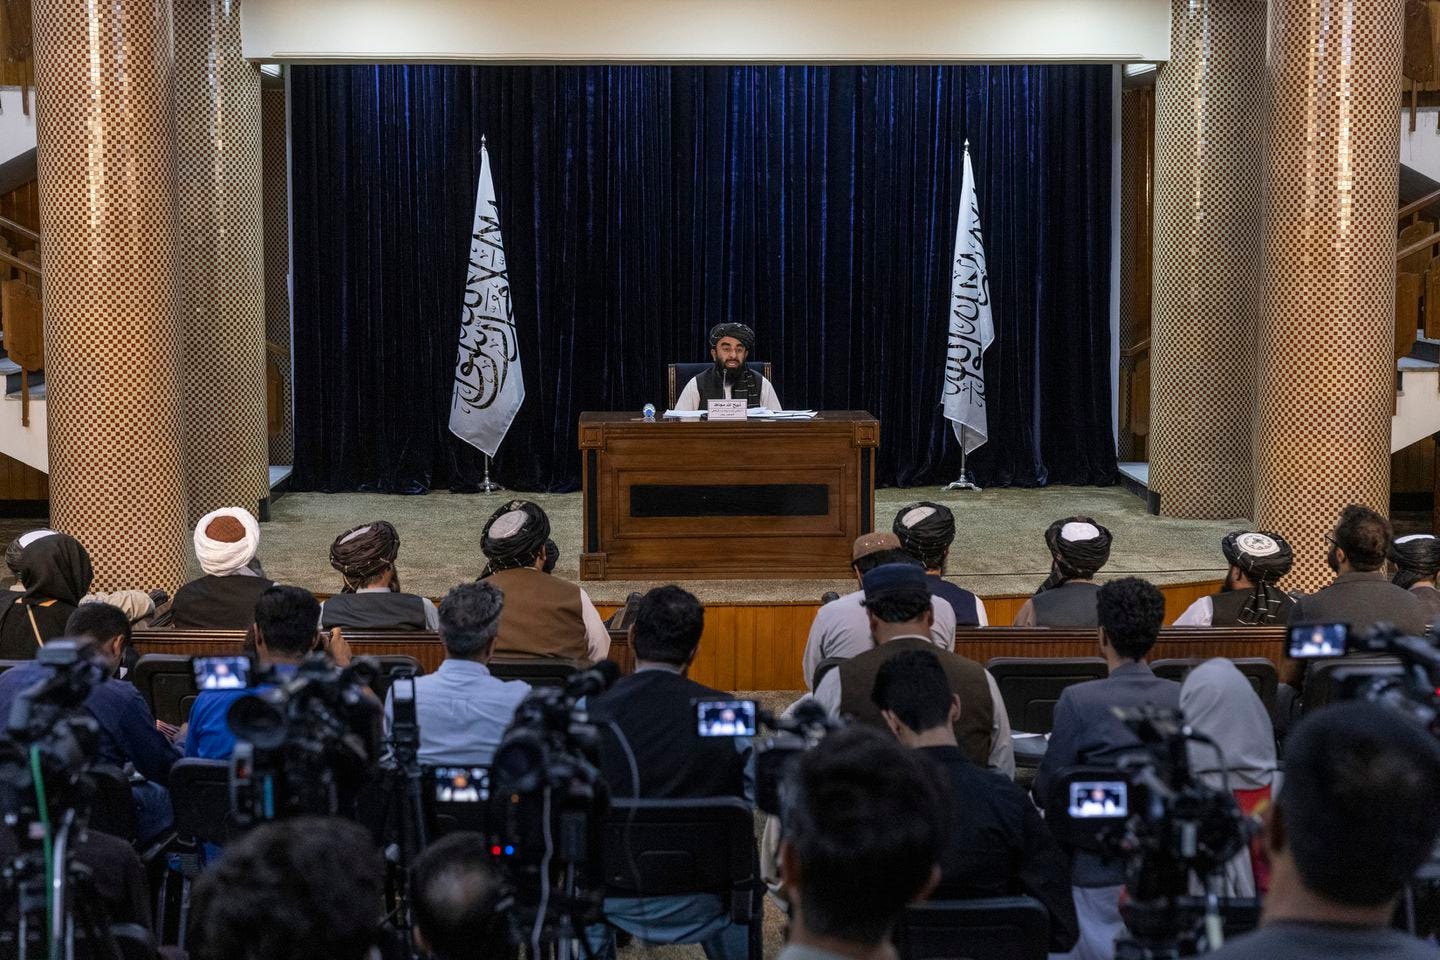 Zabihullah Mujahid, spokesman for the Taliban, conducted a news conference to announce an acting Cabinet for the new Taliban government in Kabul on Tuesday.